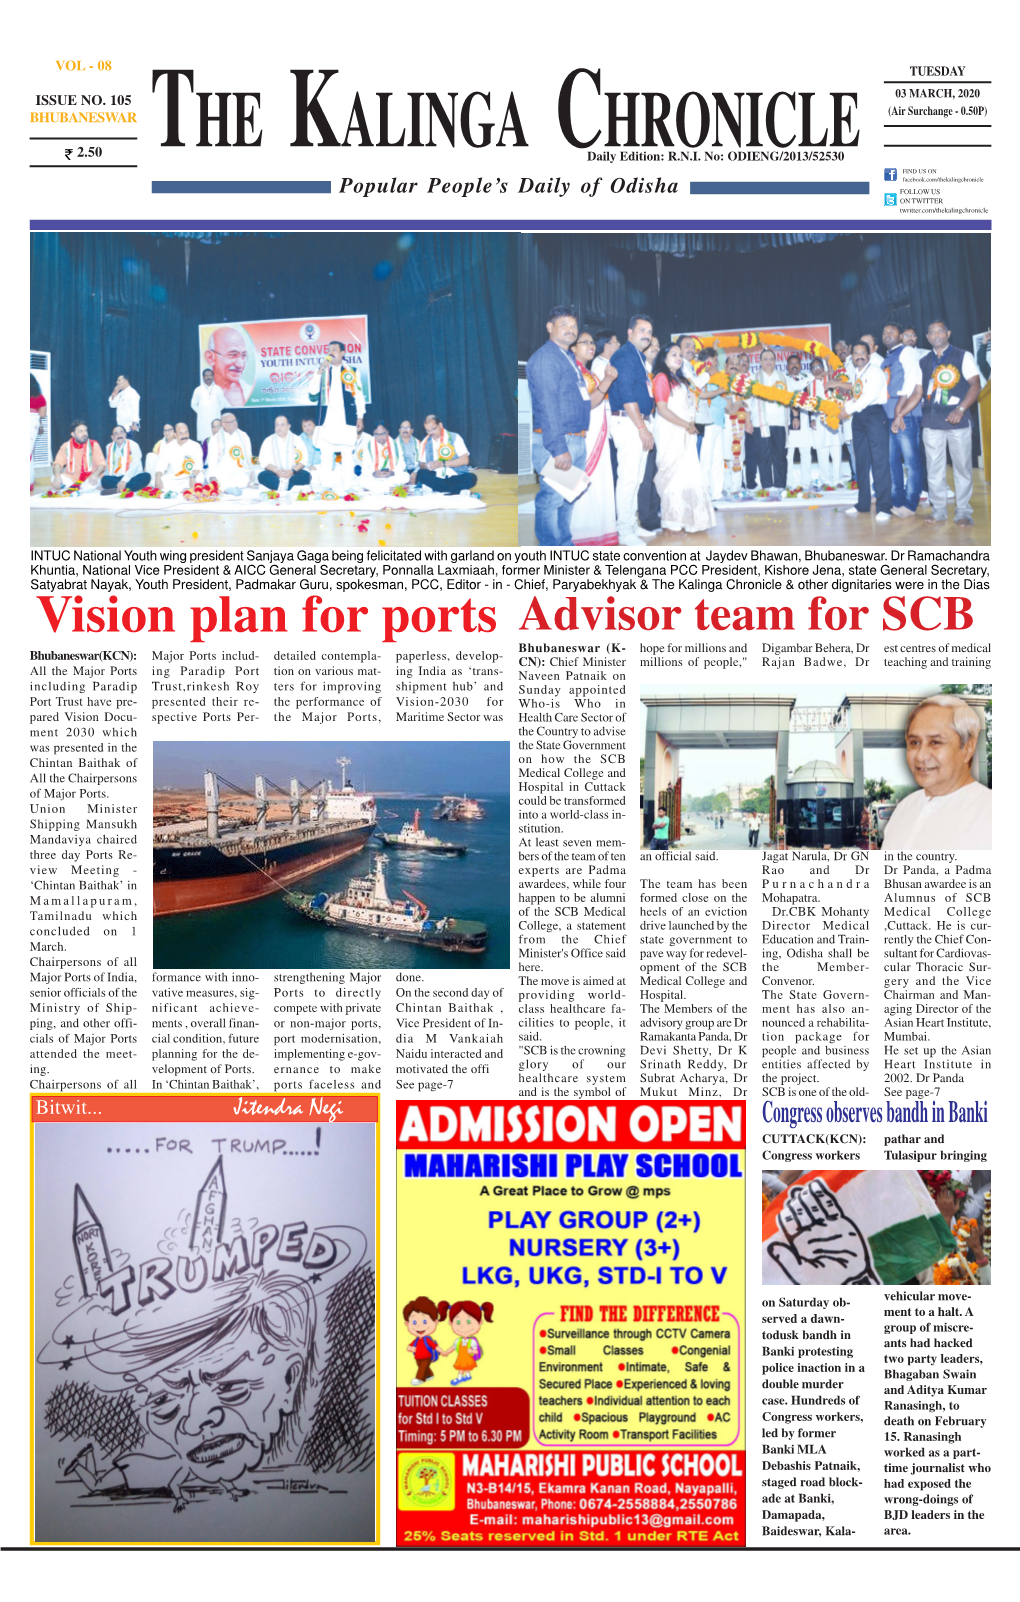 Vision Plan for Ports